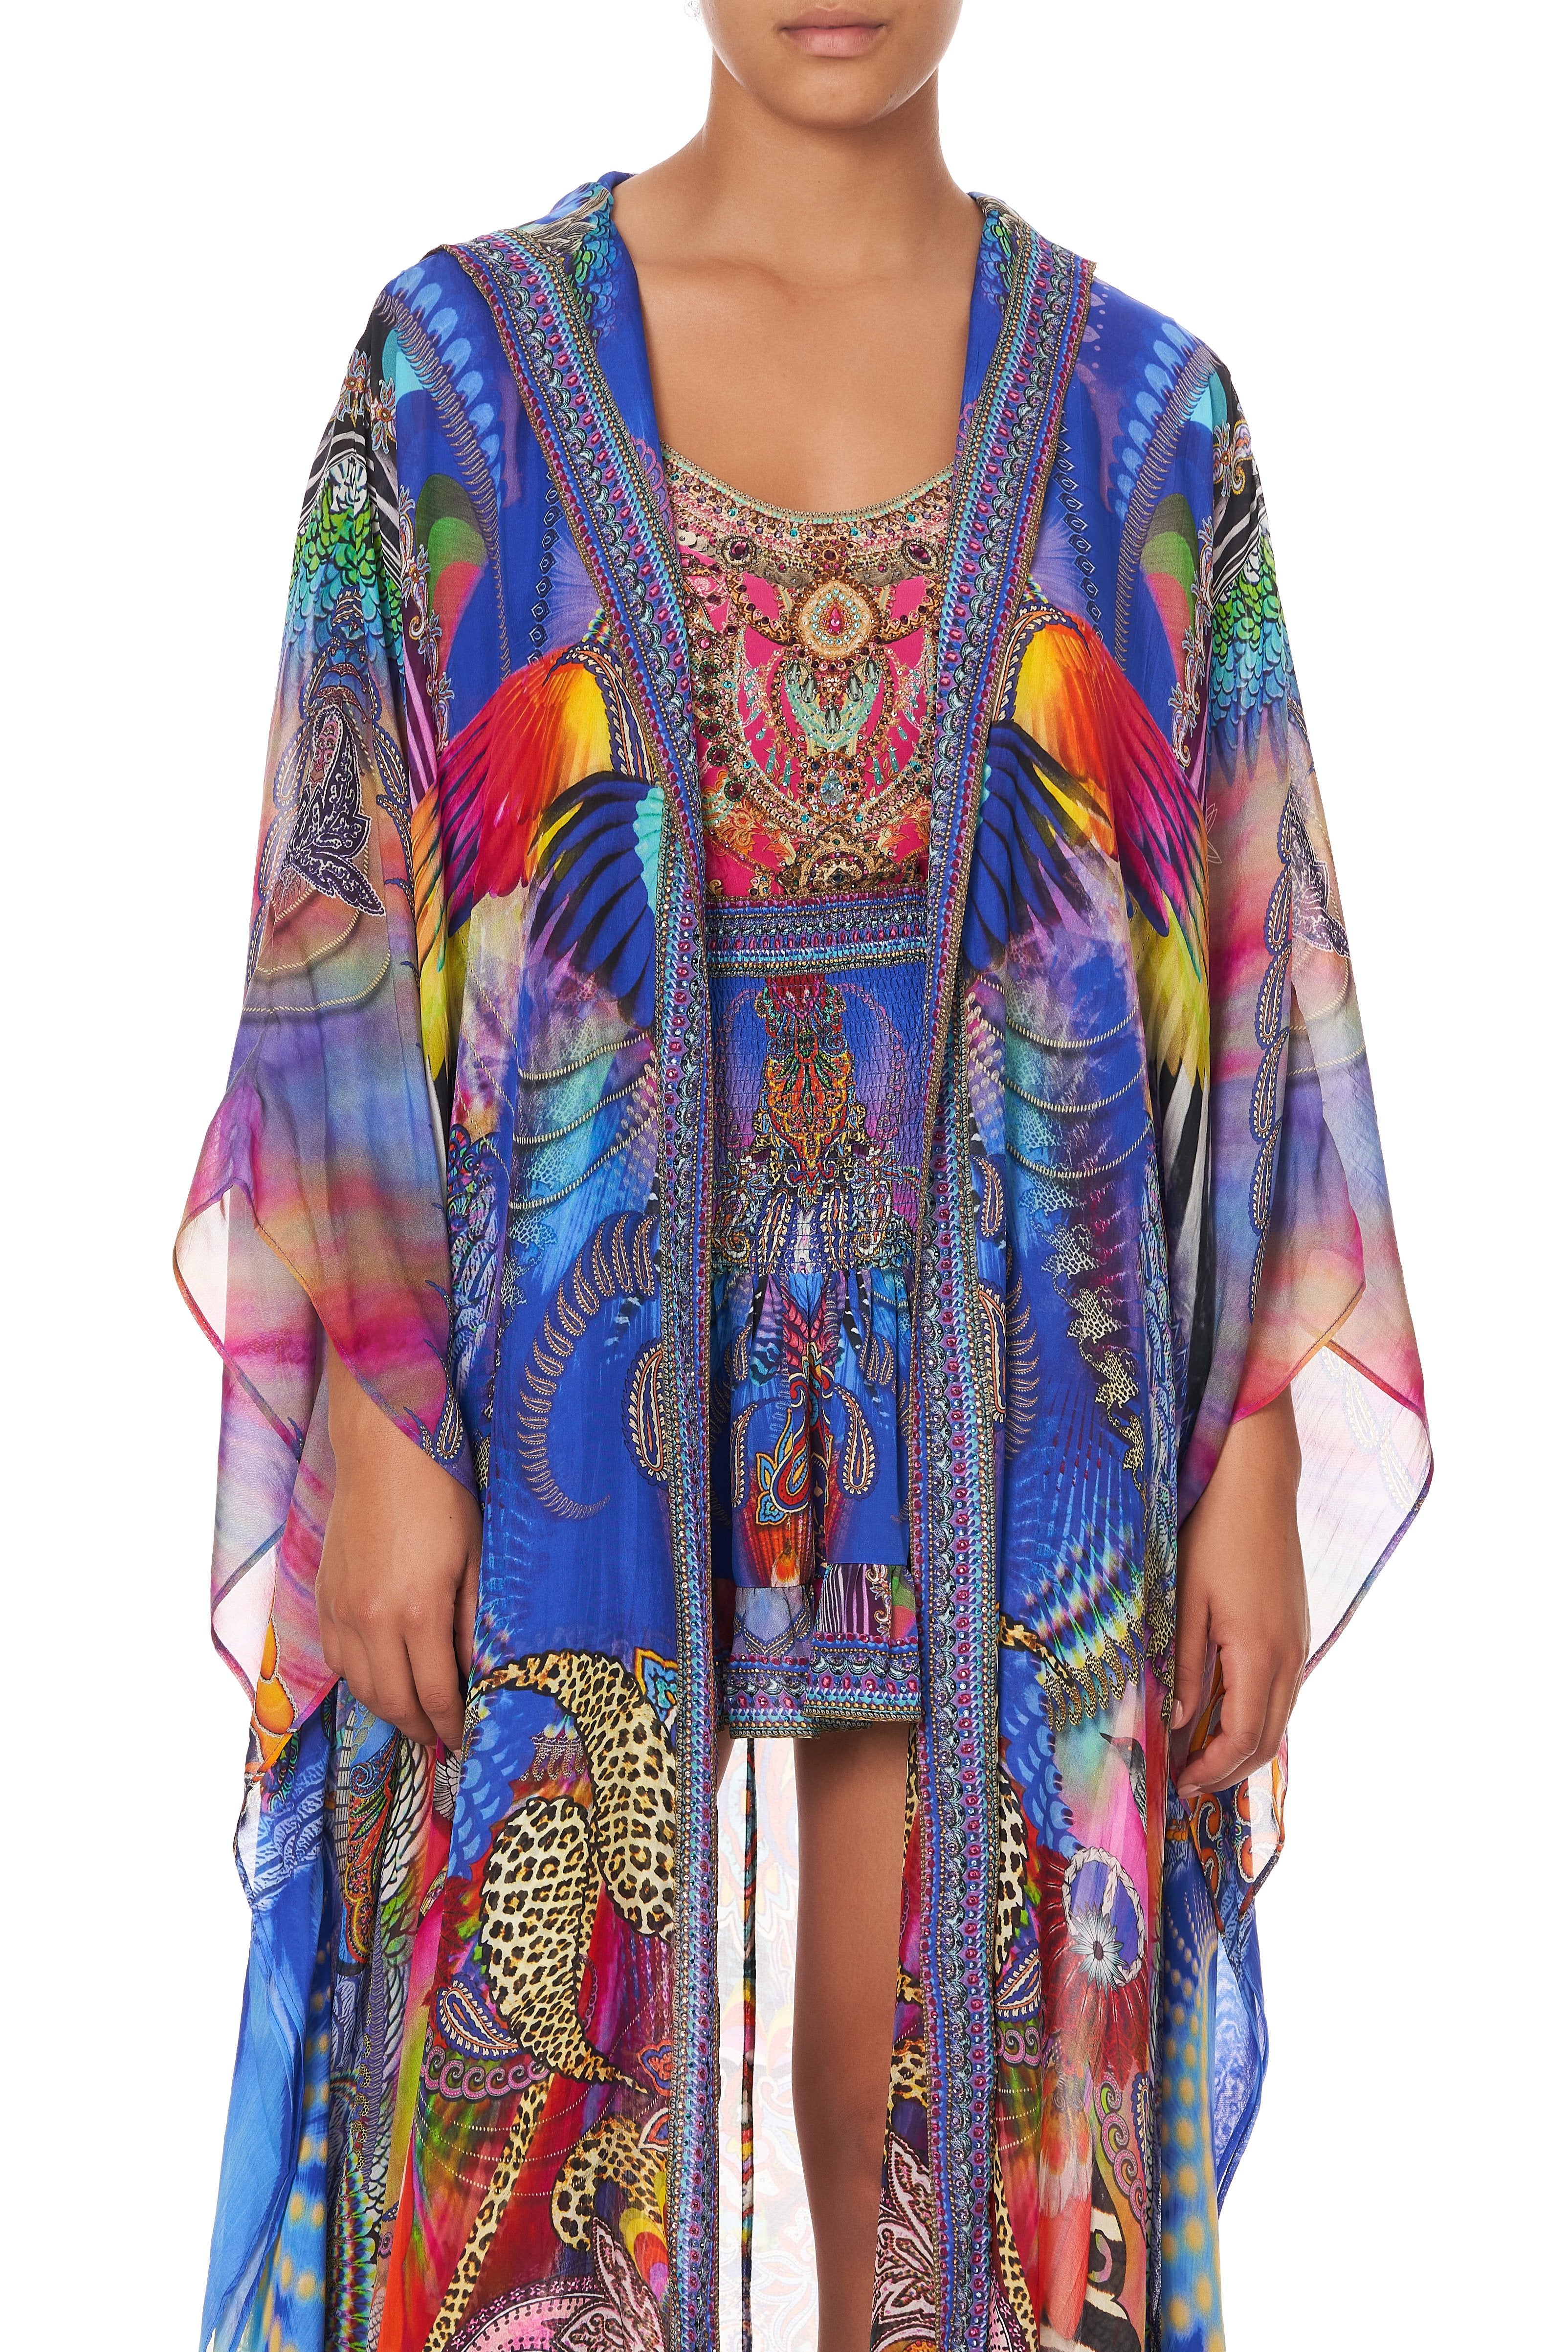 OVERSIZED ROBE PSYCHEDELICA